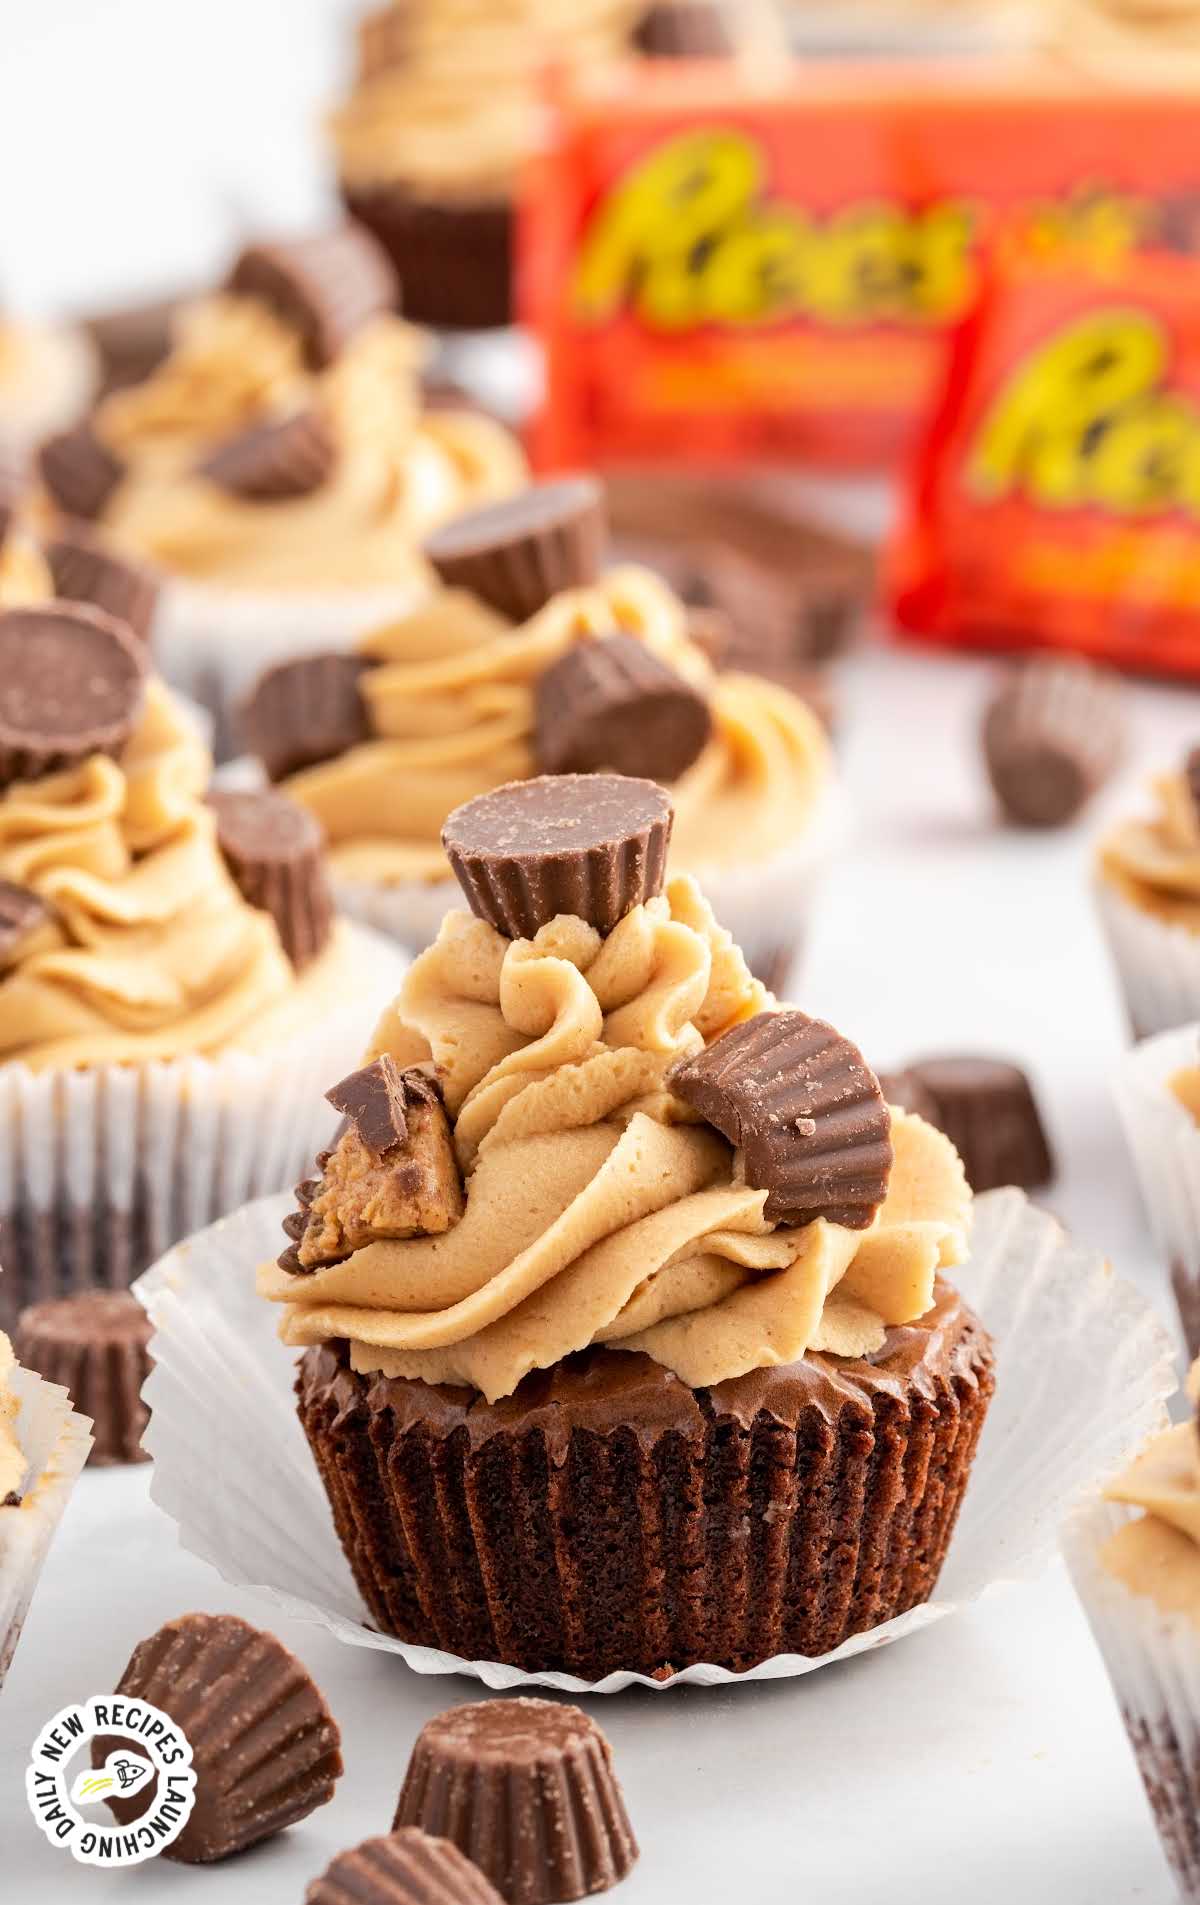 Reese's Peanut Butter Cupcakes in a cupcake wrap